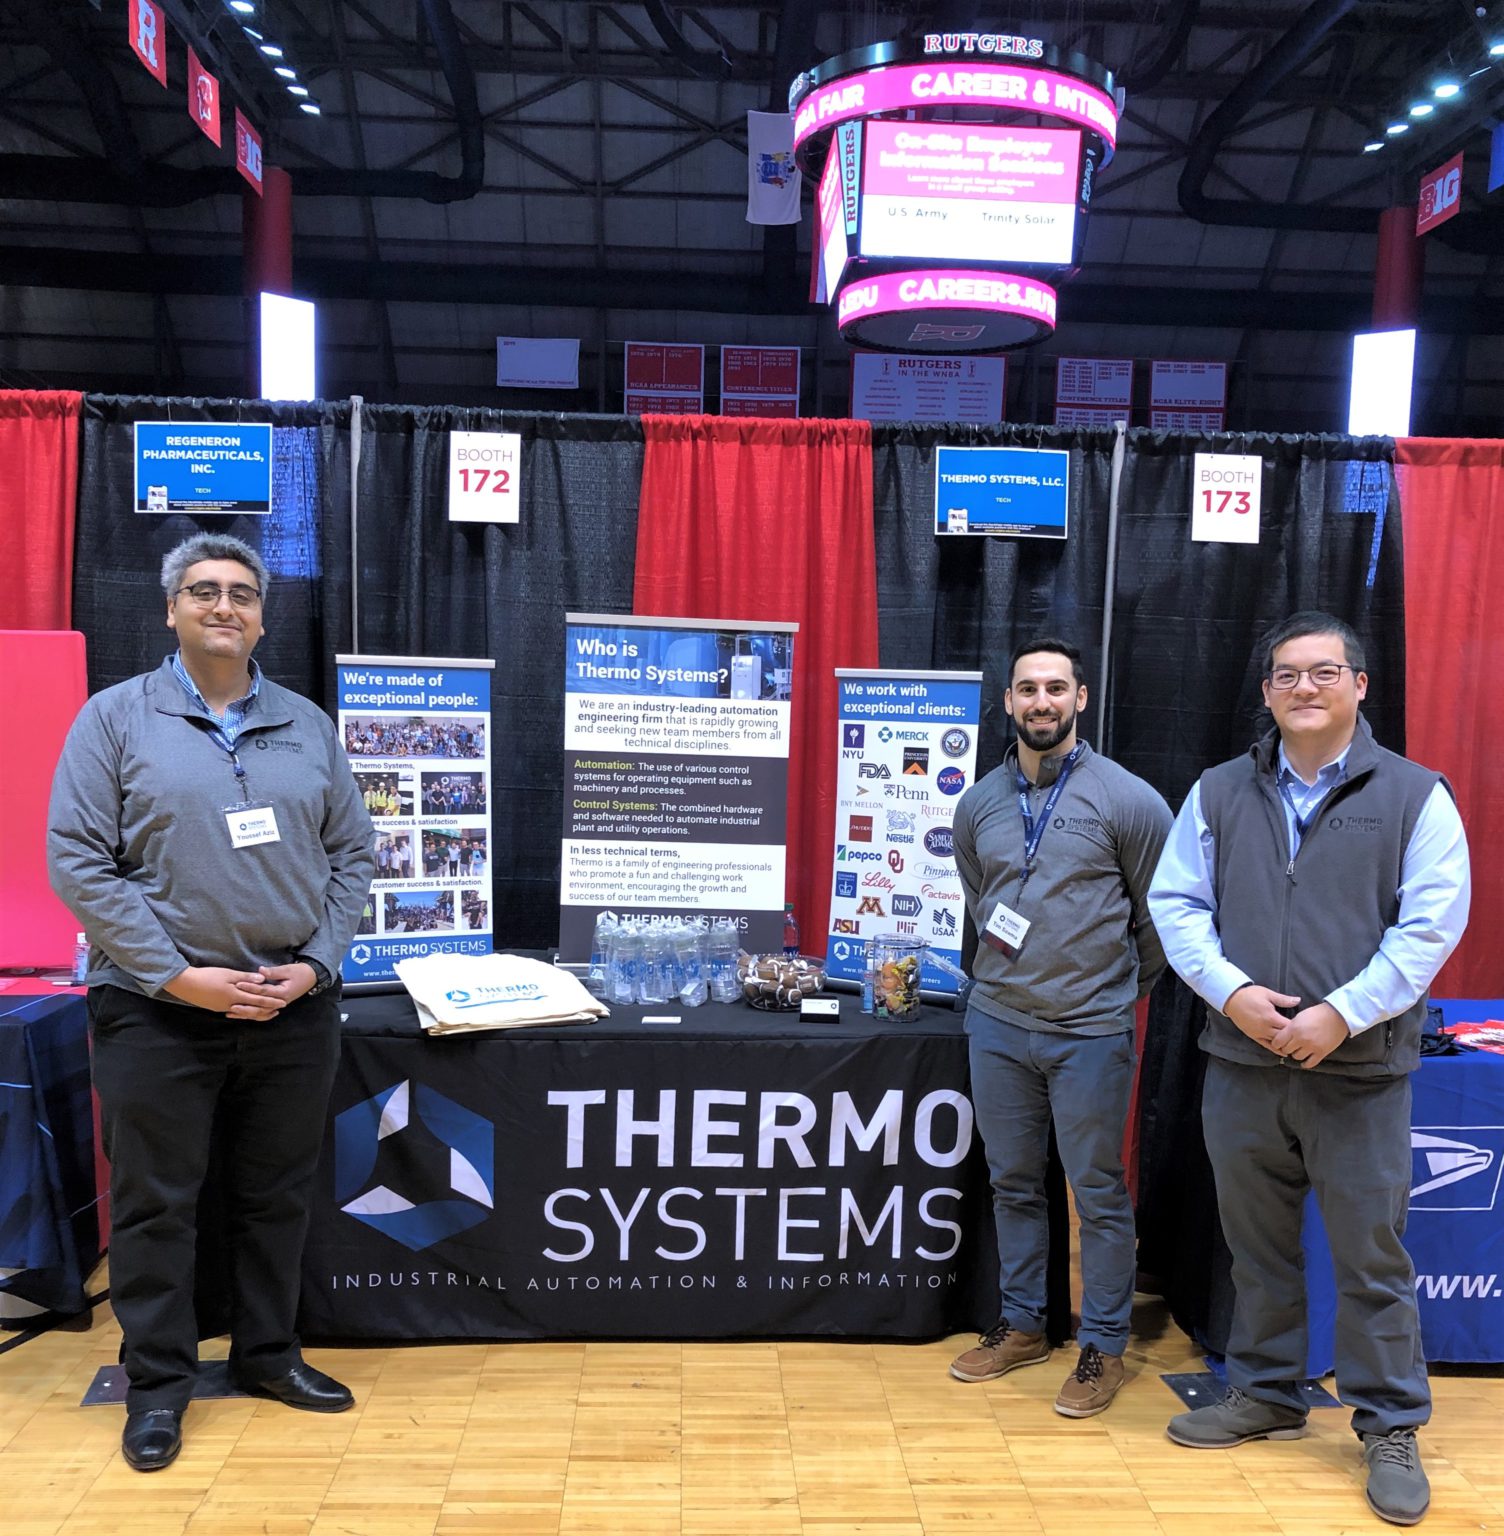 Thermo Begins the 2020 Career Fair Tour Thermo Systems